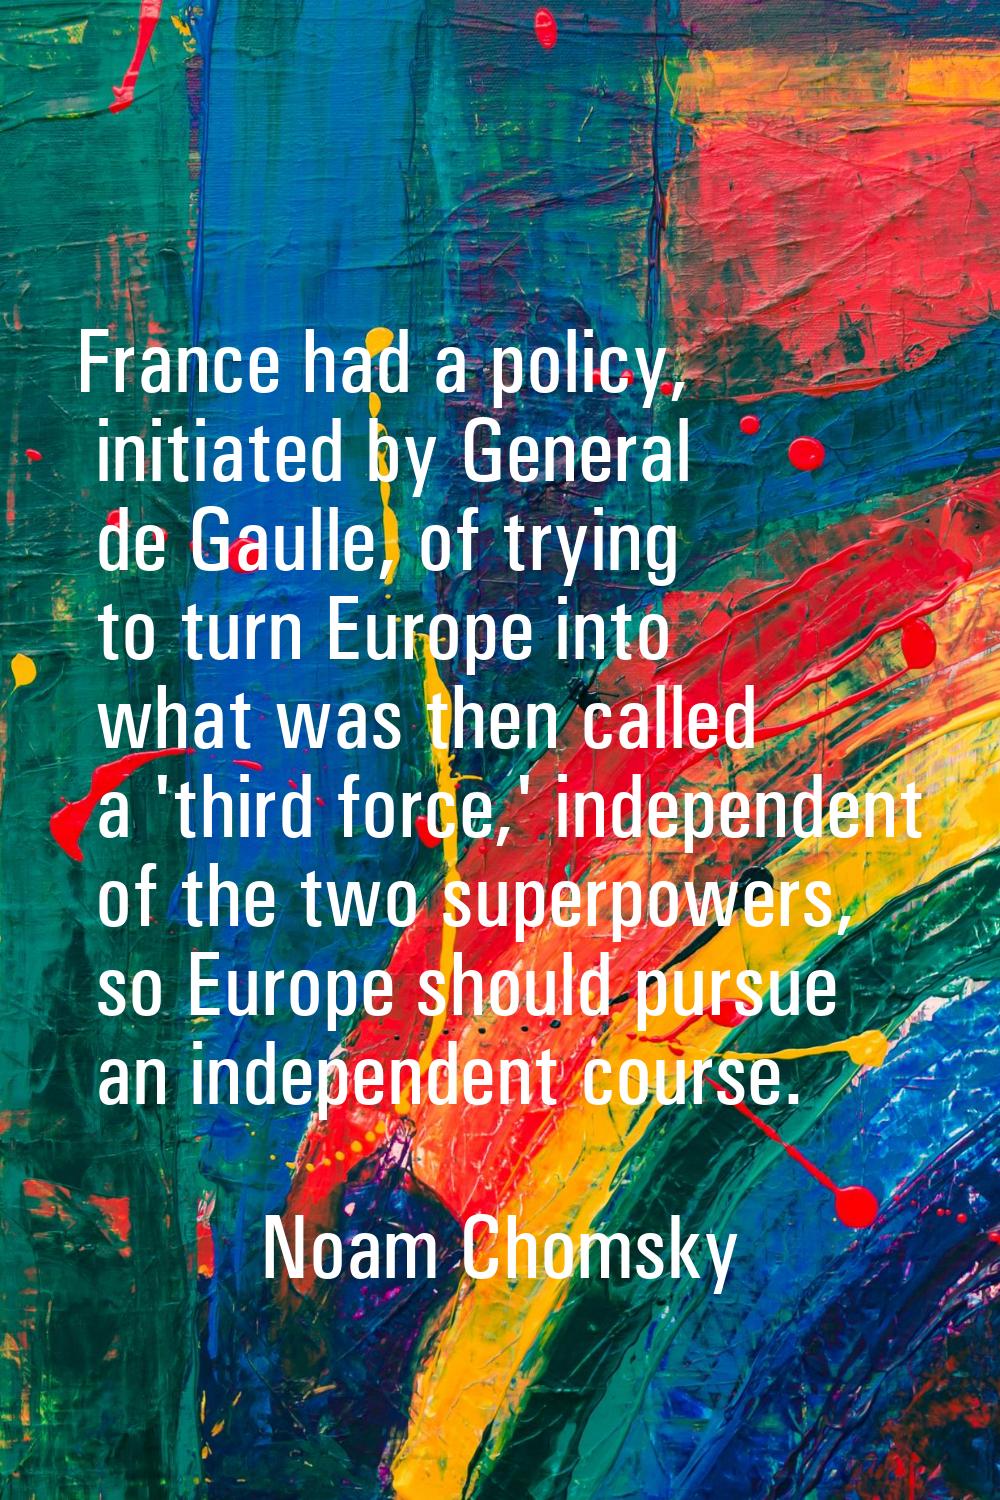 France had a policy, initiated by General de Gaulle, of trying to turn Europe into what was then ca